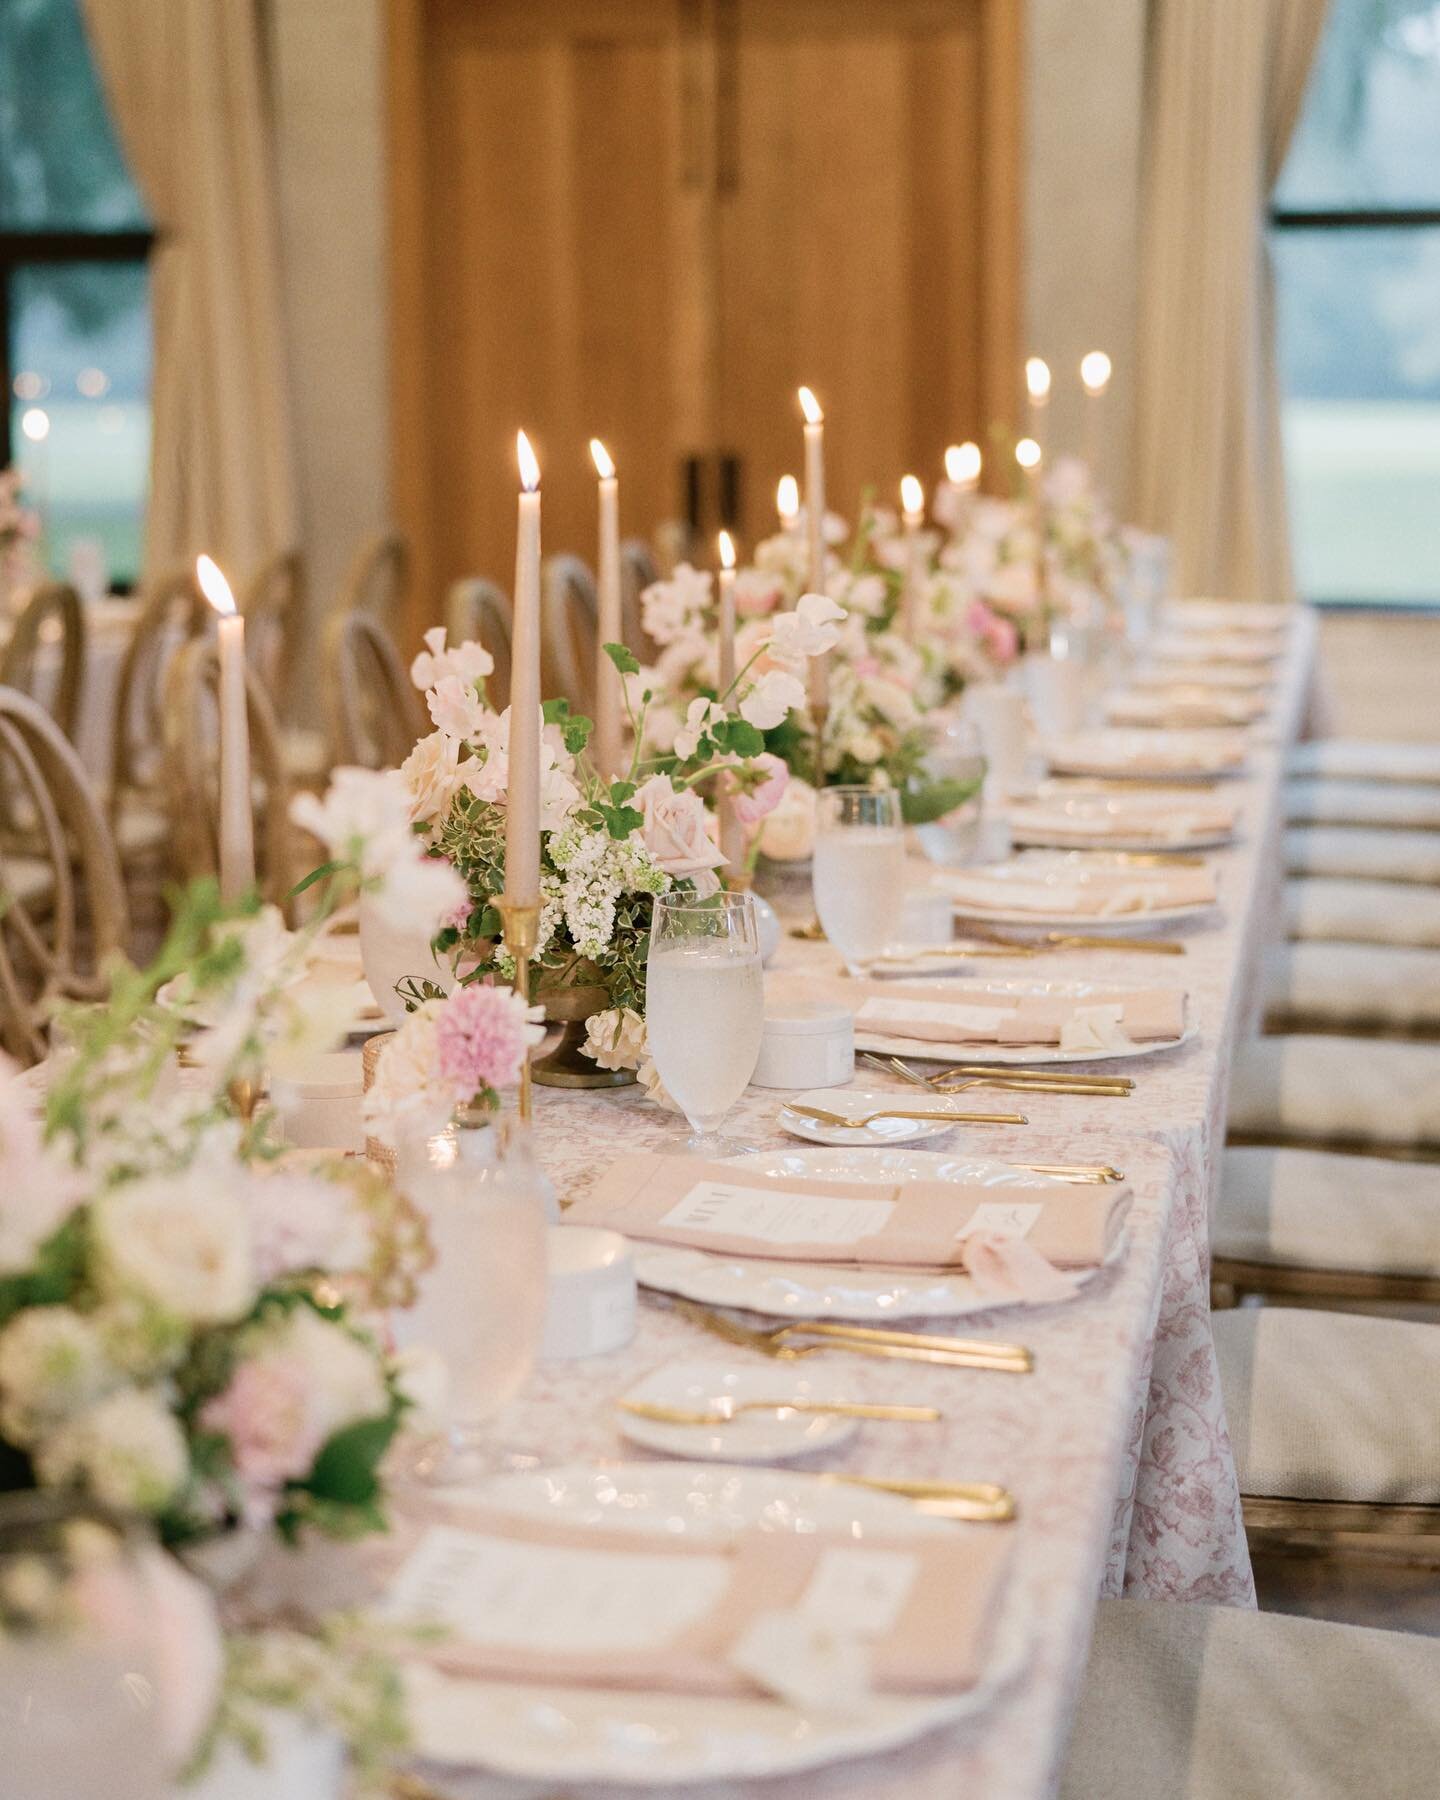 Long table designs are our favorite here at Marissa Daniella Events. When floorpans allow we opt for the longest tables possible. These set-ups create a sense of family when your able to bring 24 people together at one long table. 
.
.
.
Wedding Plan